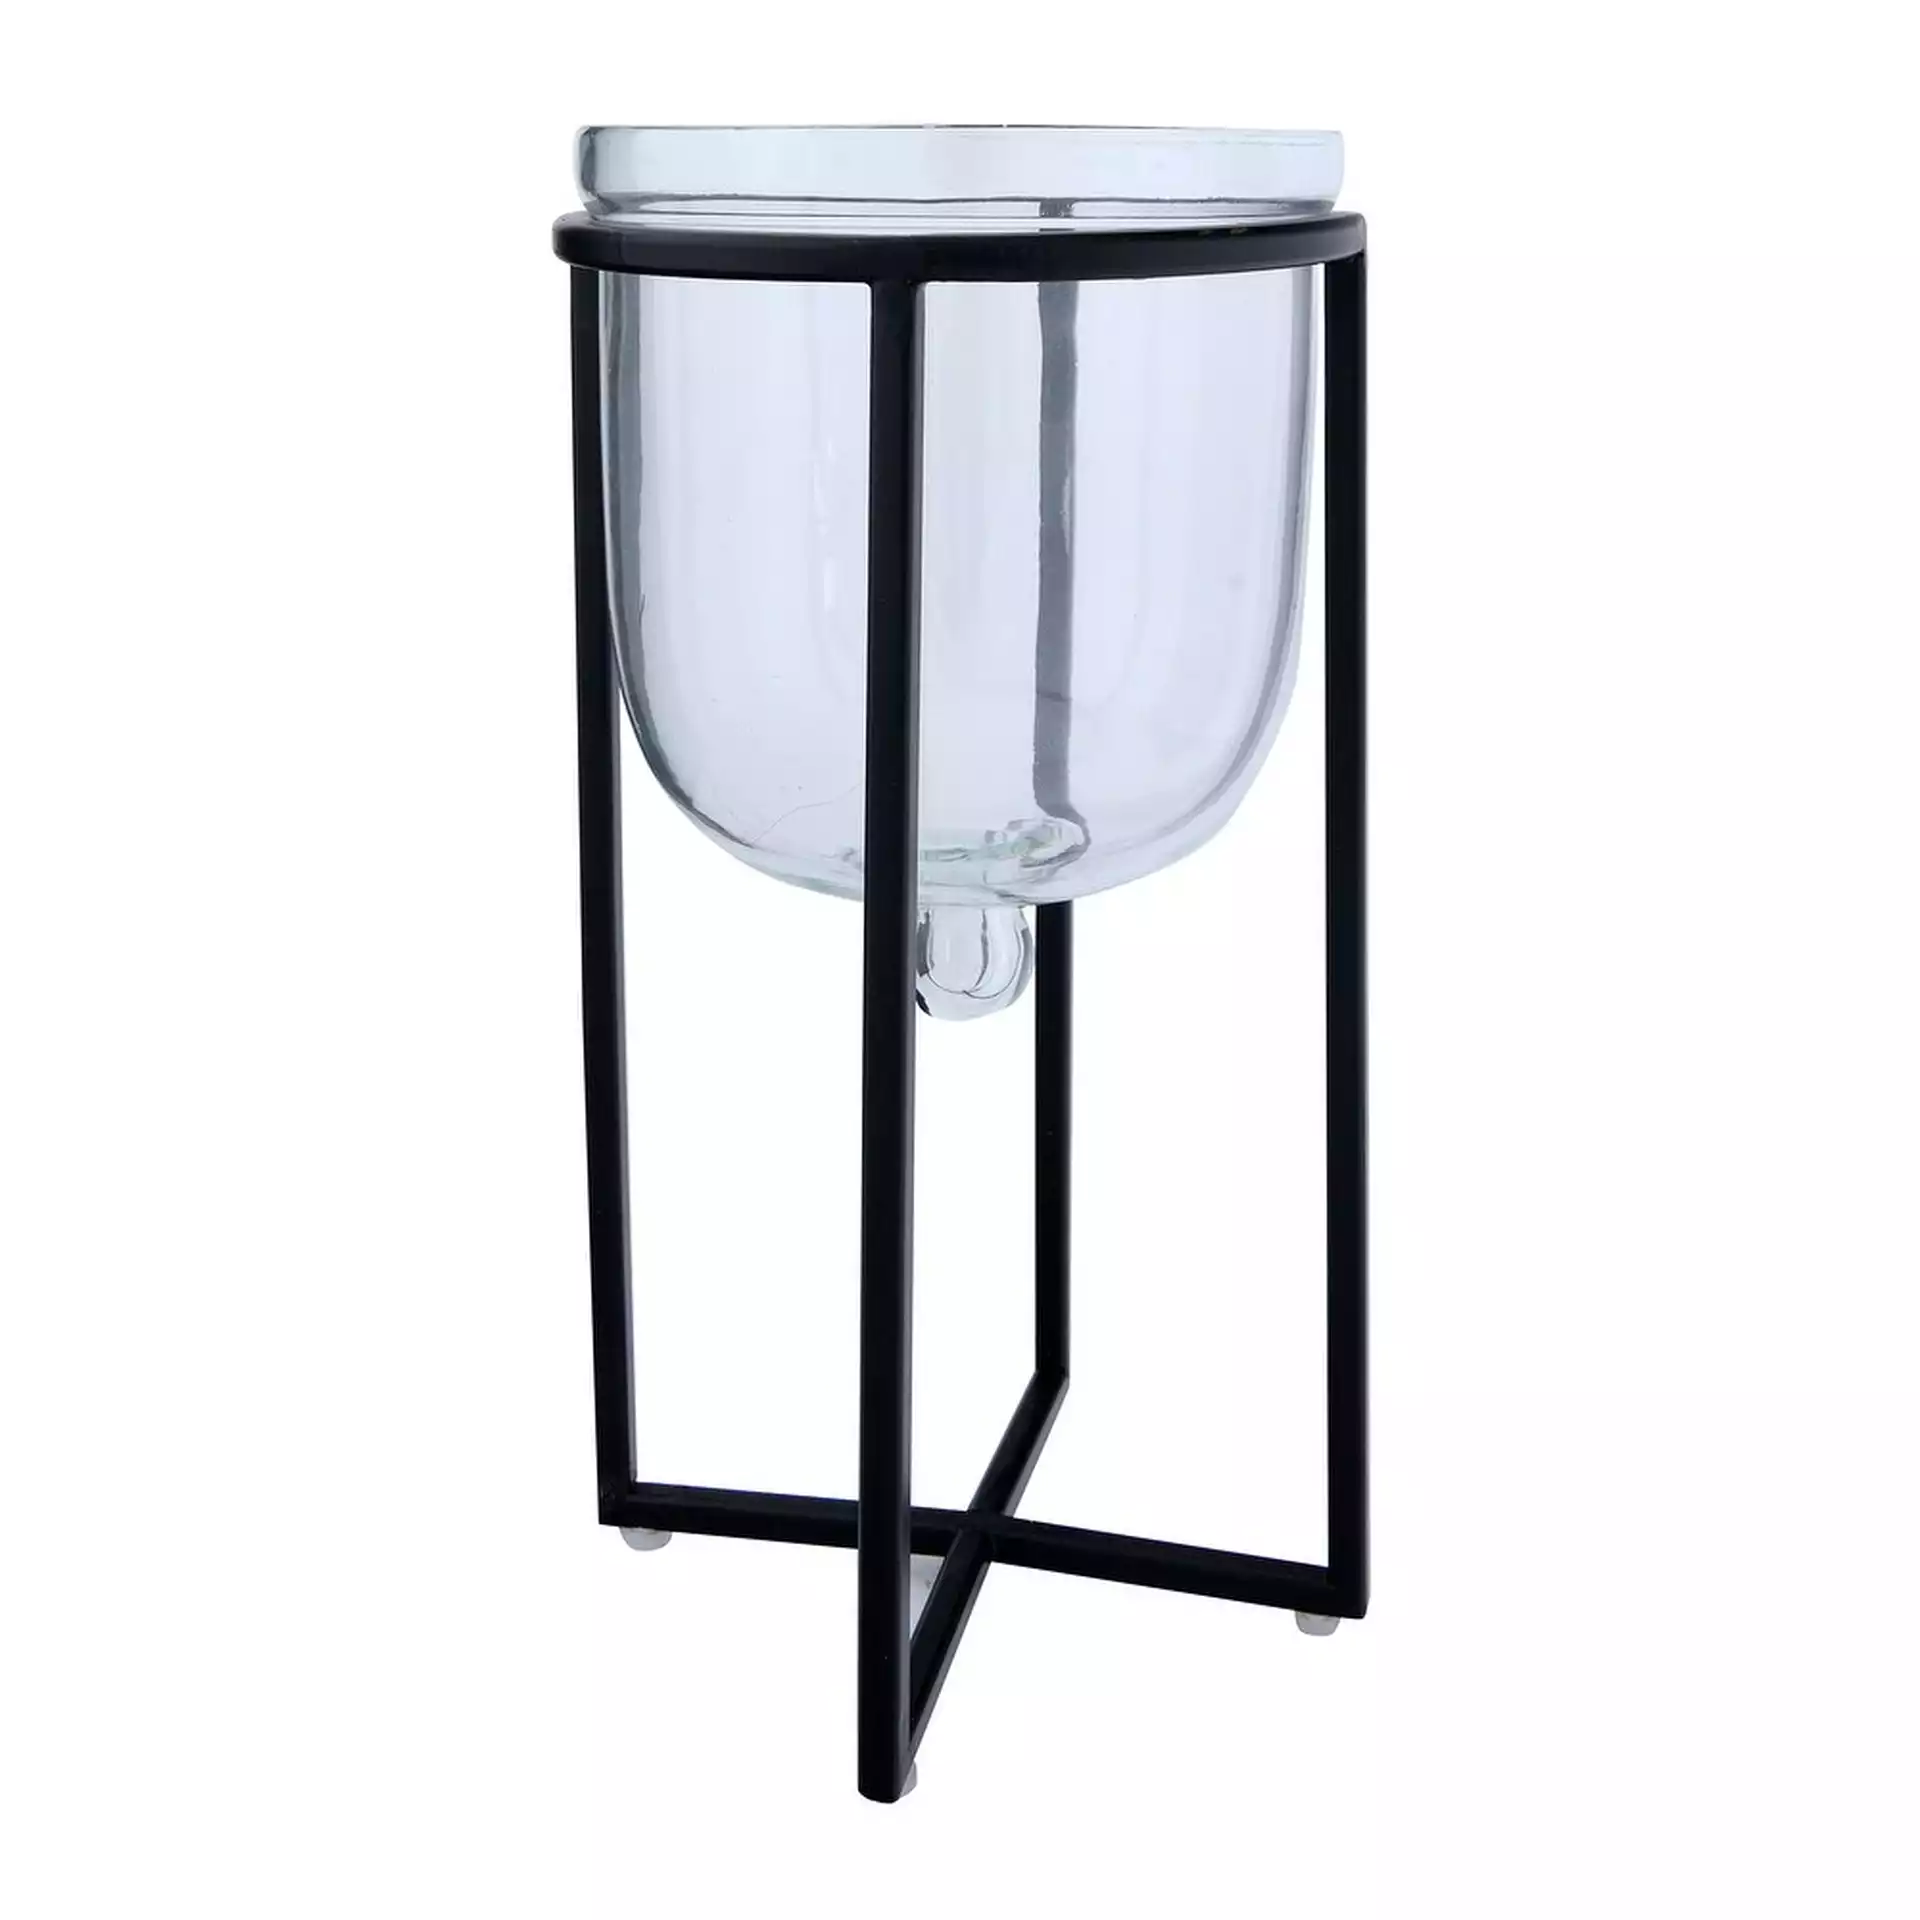 Glass Planter with Black Metal Stand, Set of 2 Pieces